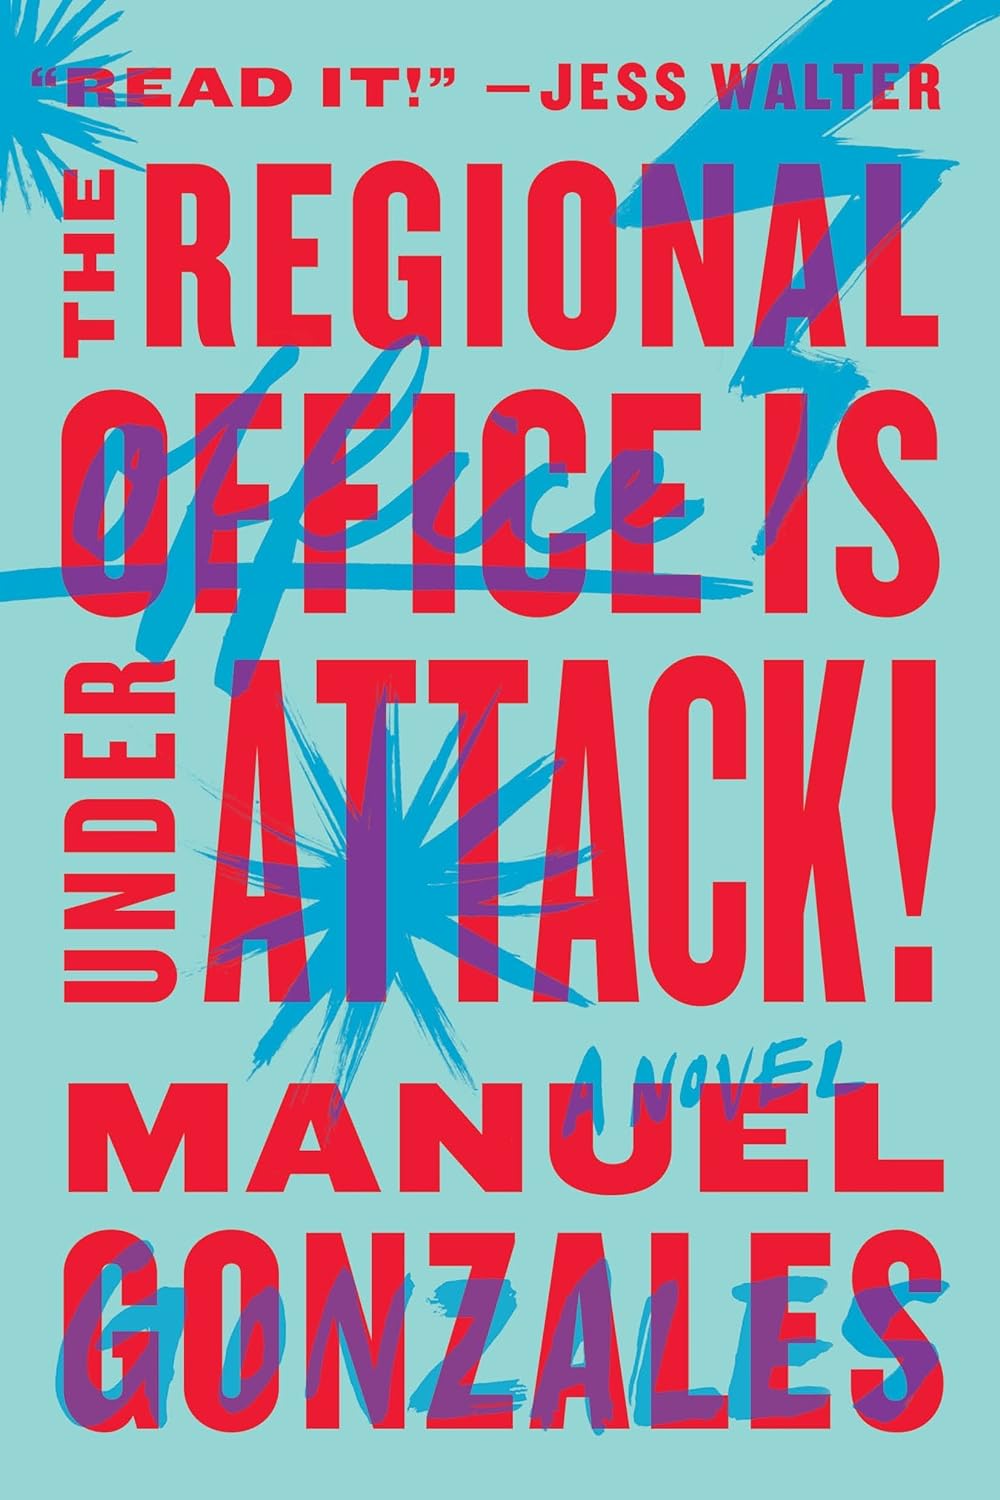 The Regional Office is Under Attack! (2016, Riverhead Books)